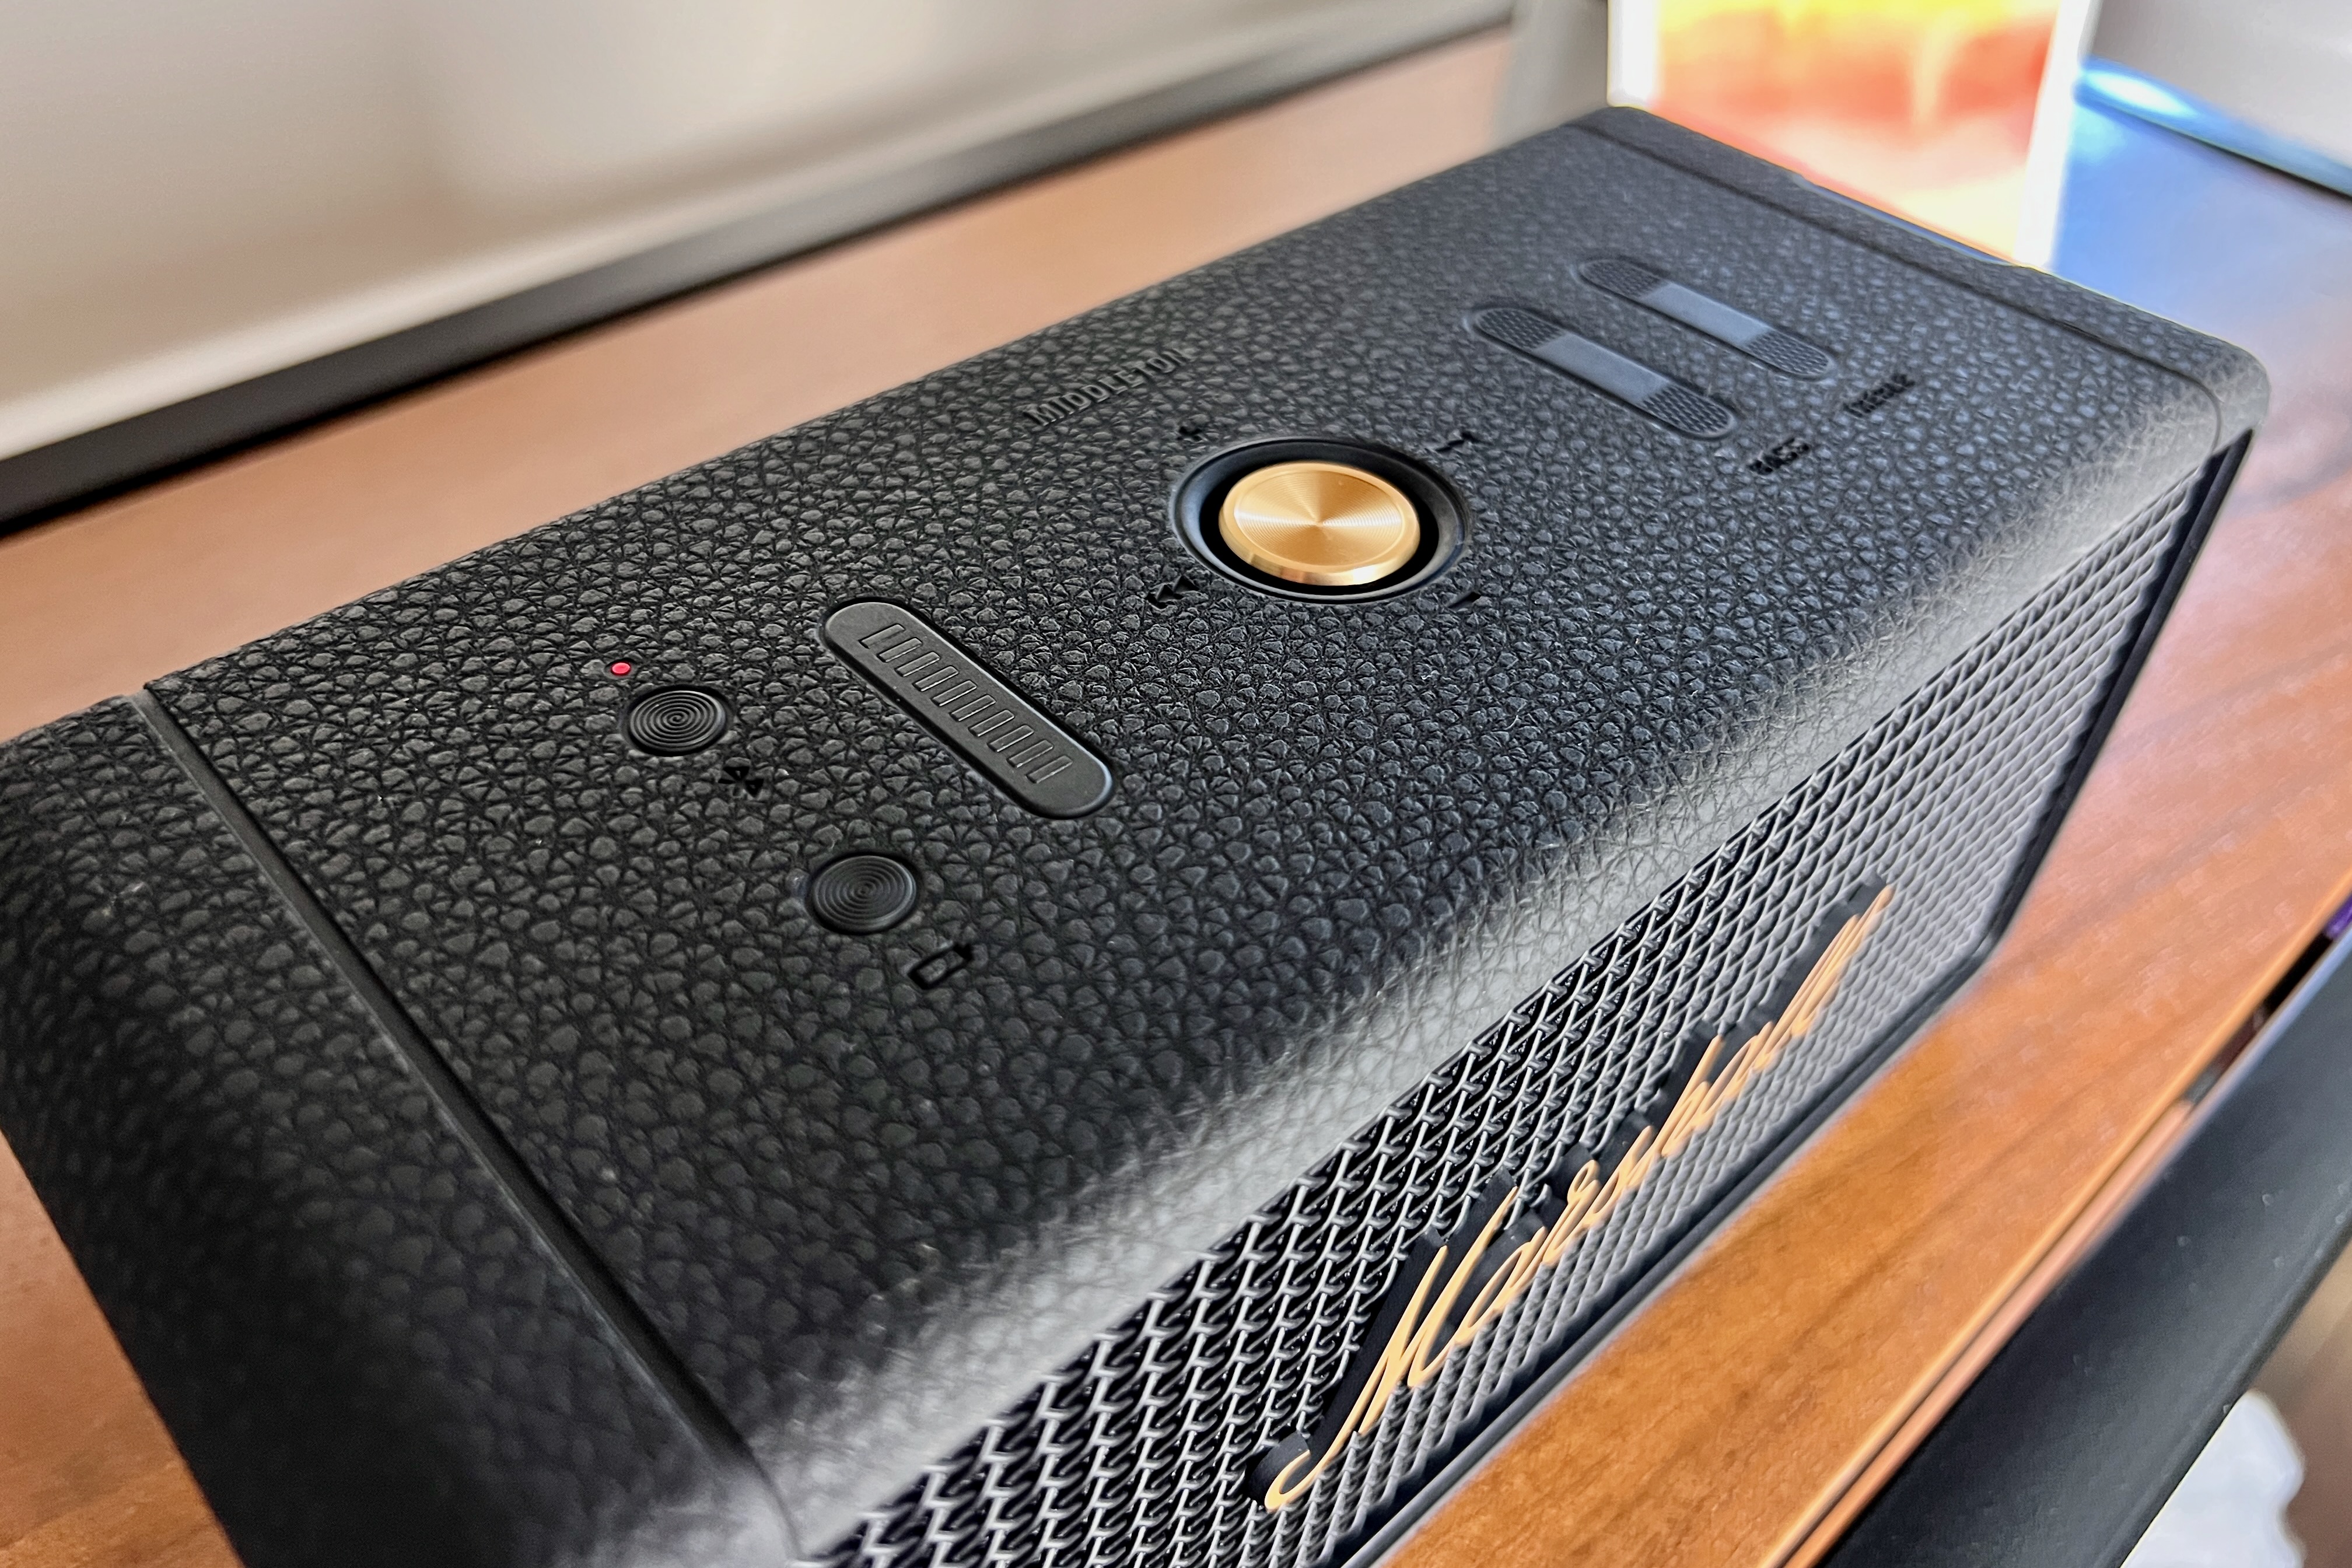 Marshall's Middleton Bluetooth speaker is the company's new